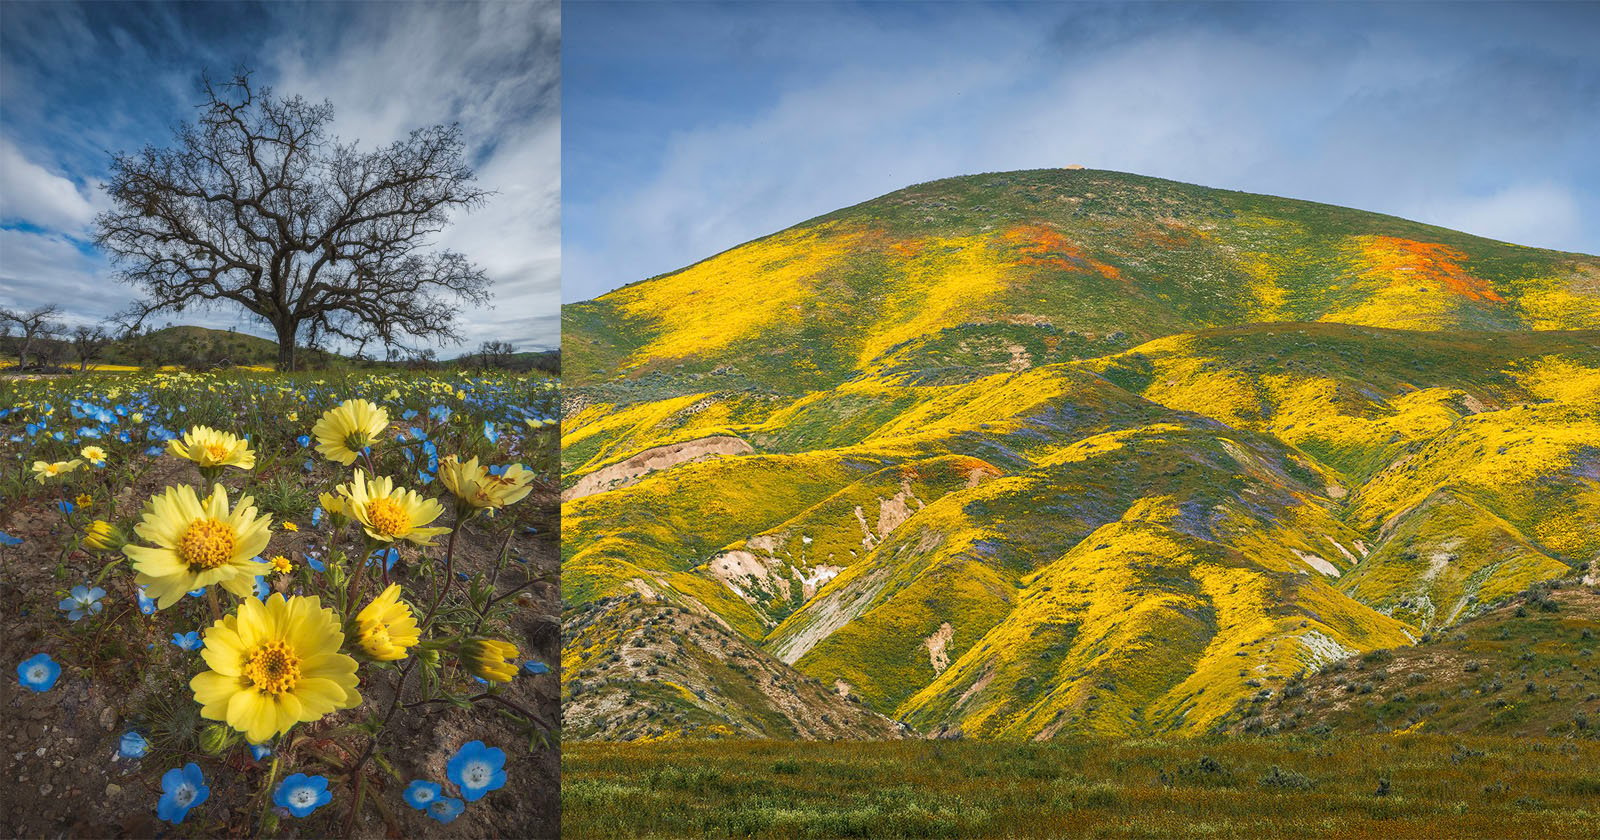 Wildflower Pictures: Tips to Seize the California Superbloom